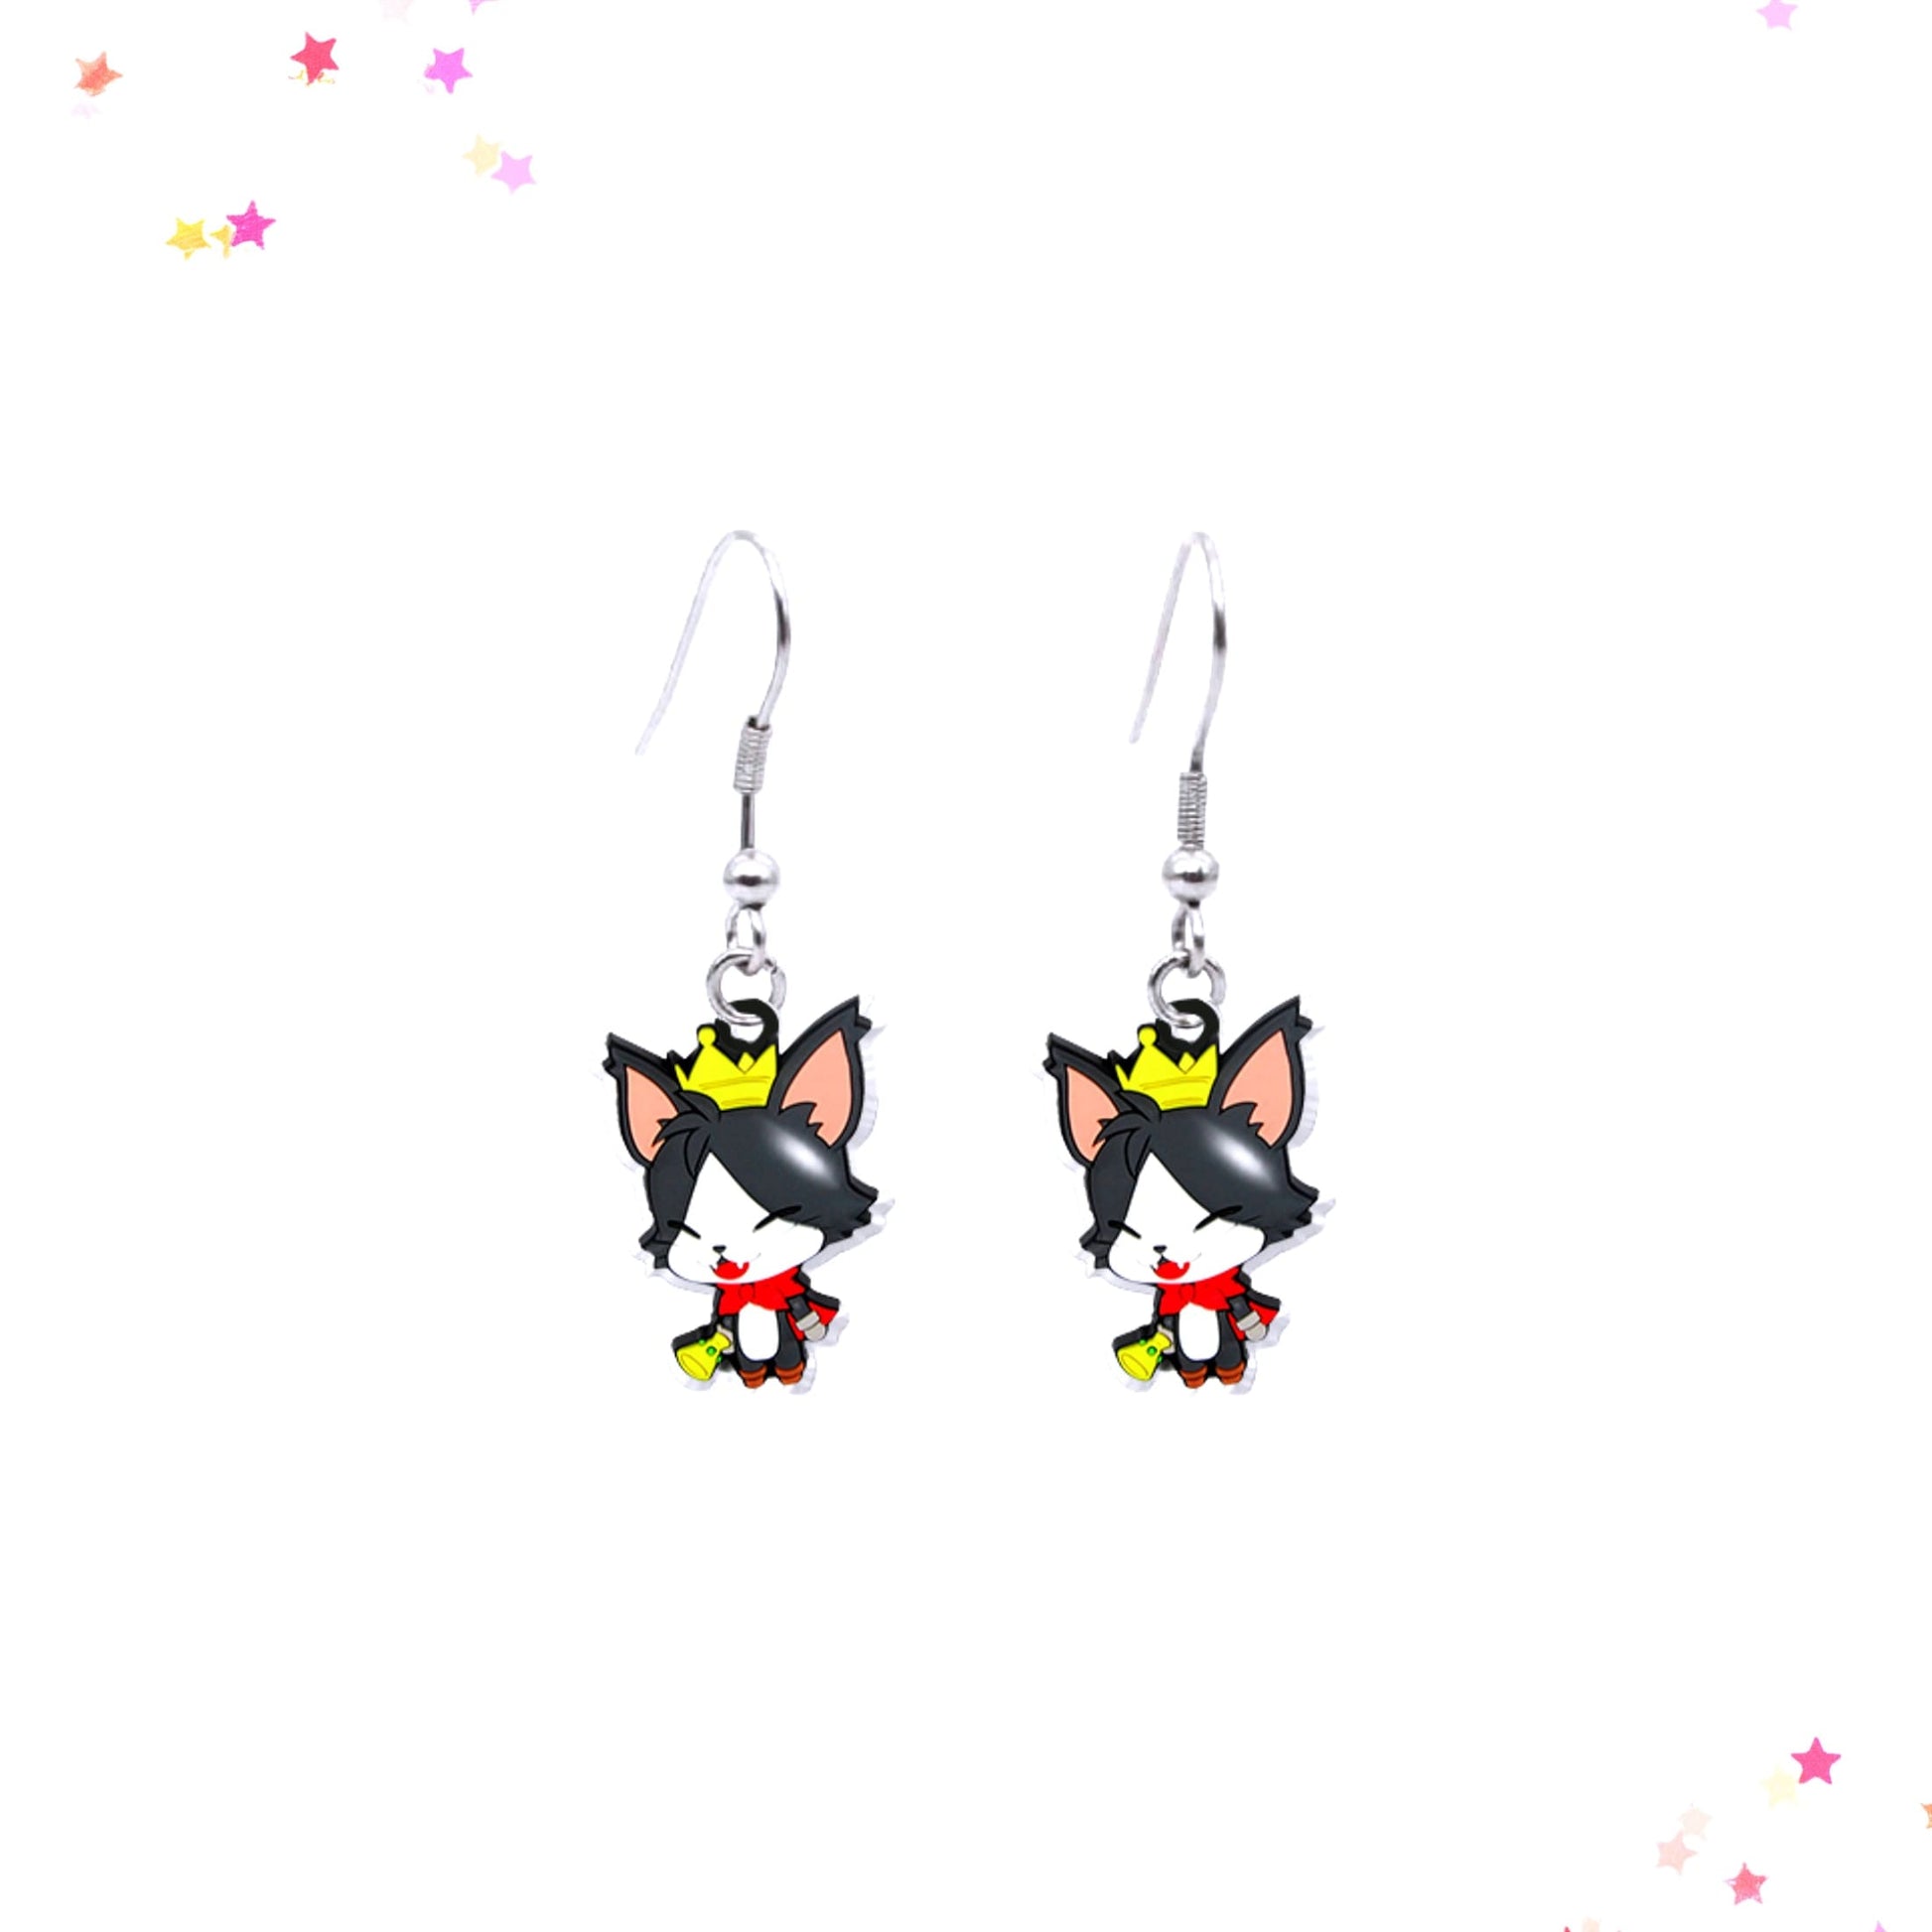 Final Fantasy Cait Sith Acrylic Earrings from Confetti Kitty, Only 7.99